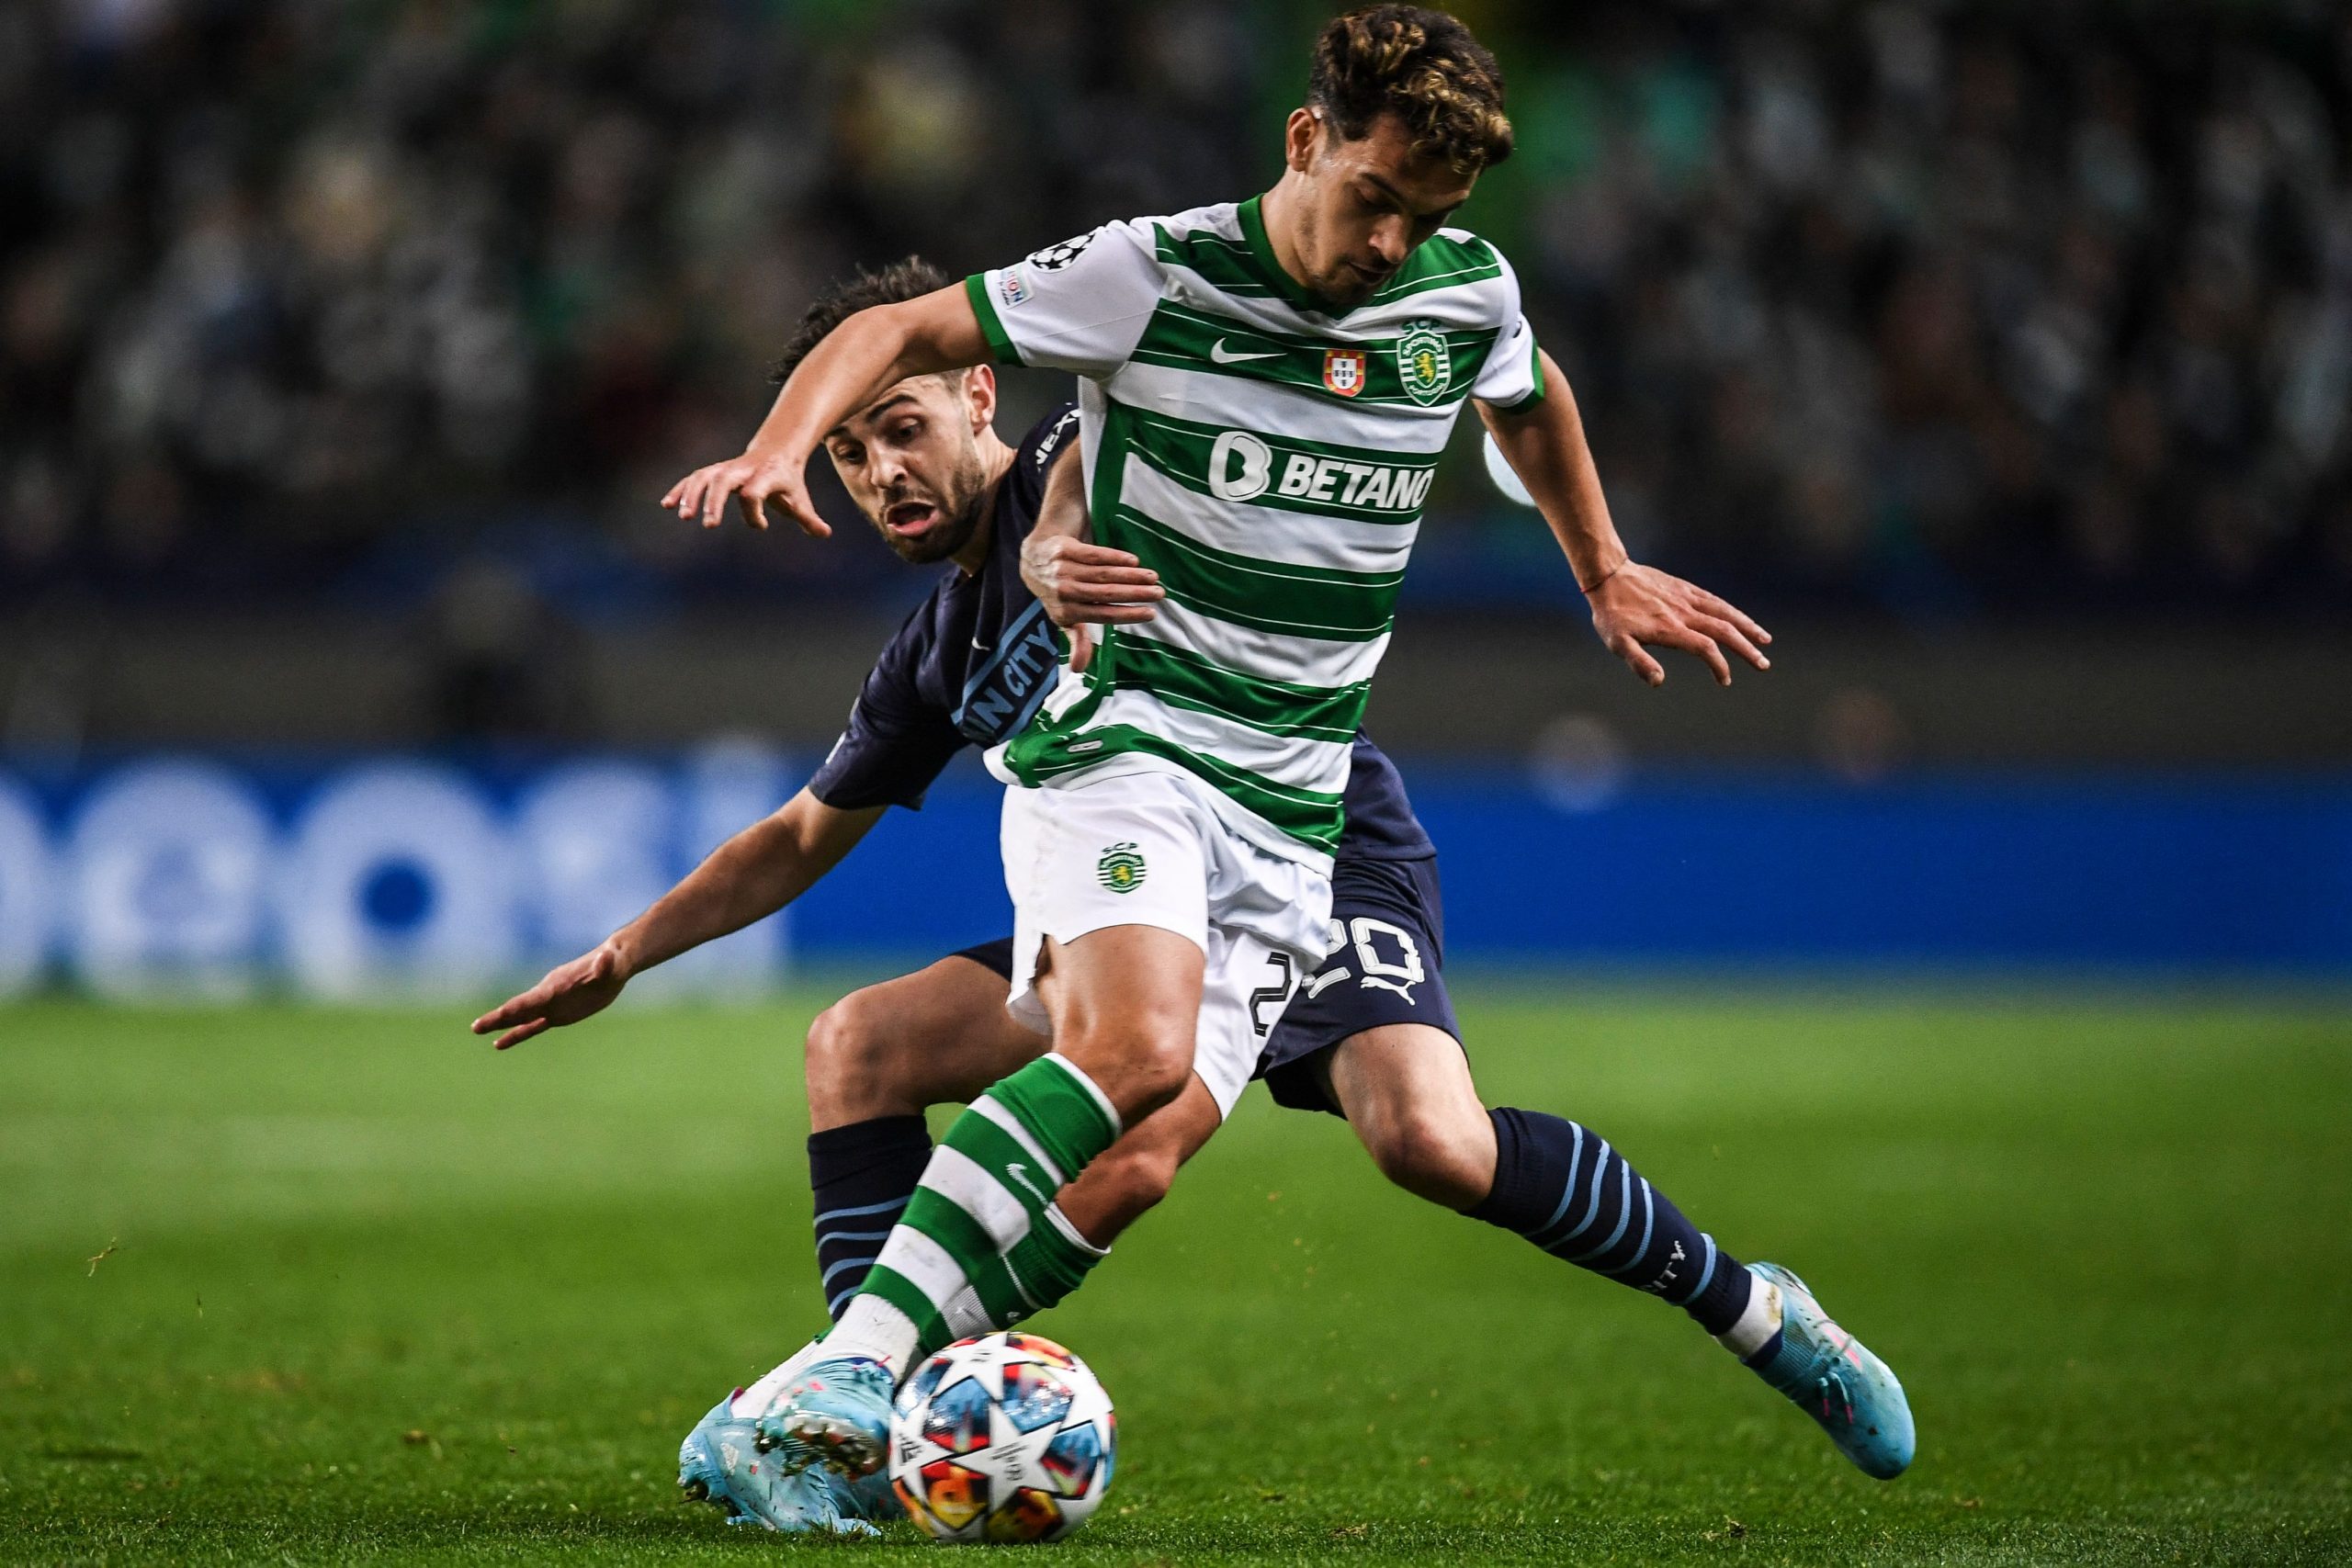 Sporting CP's Pedro Goncalves